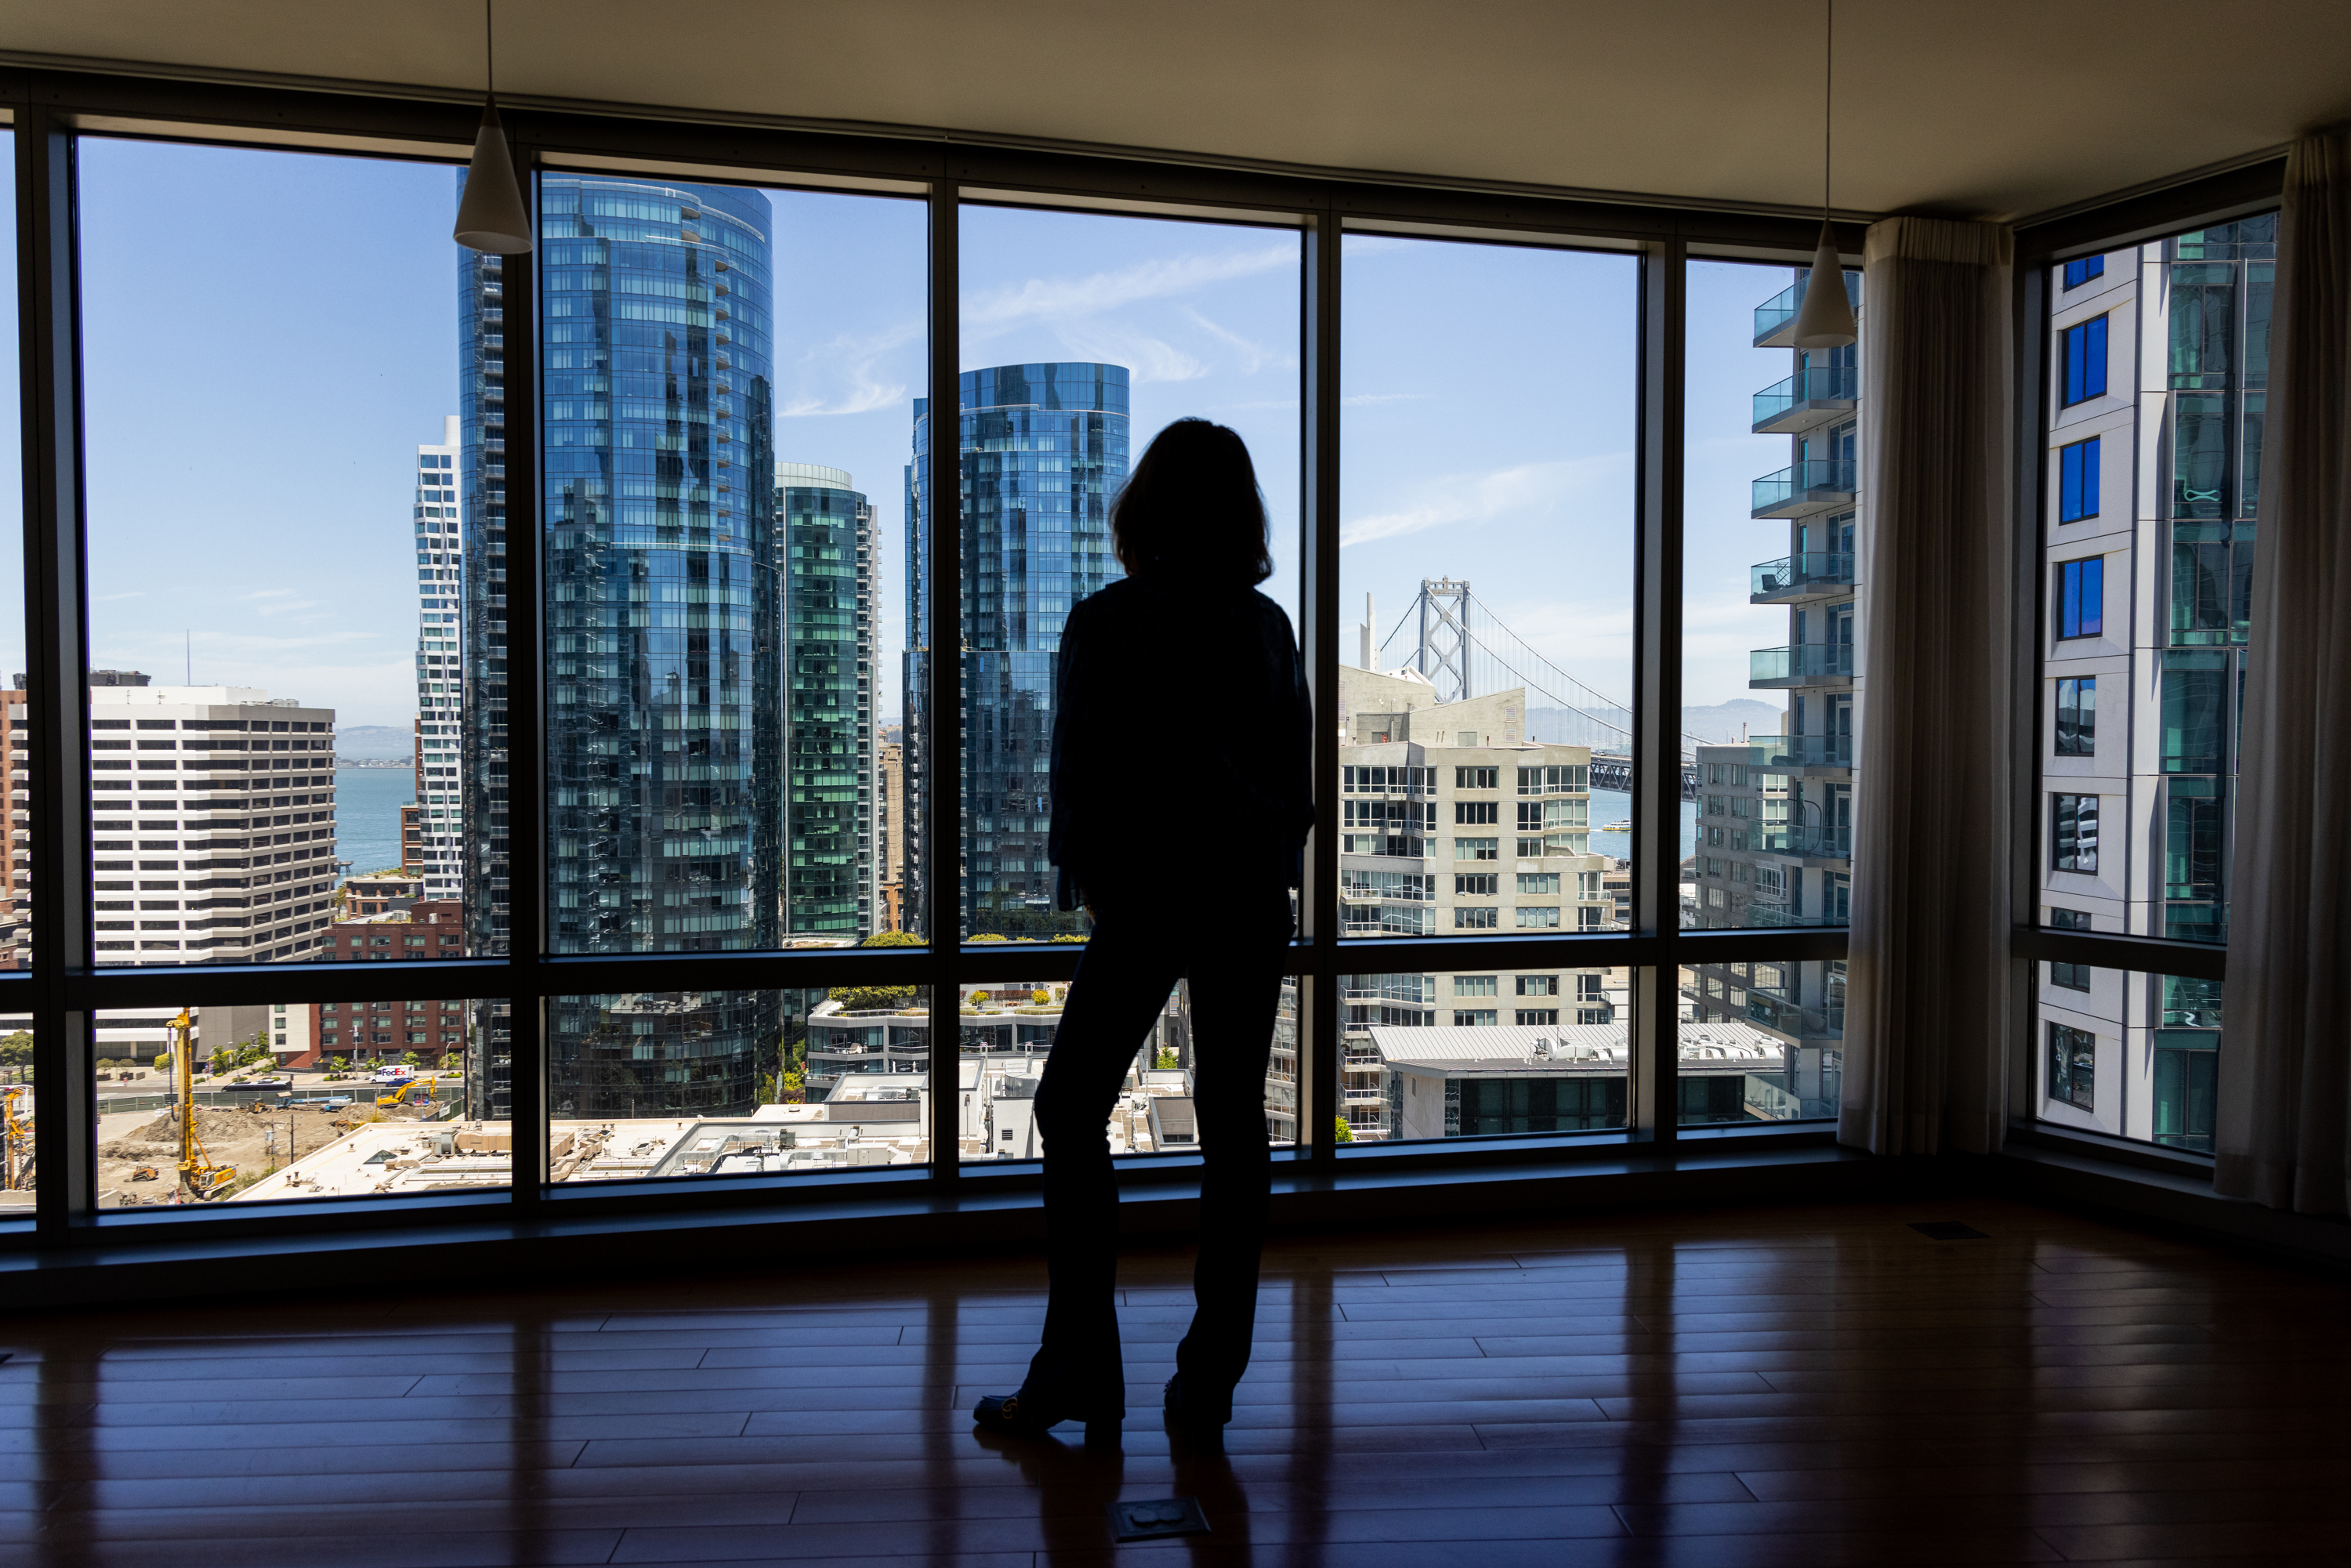 A person stands in front of a large window in an apartment, overlooking a cityscape filled with modern high-rise buildings and a partial view of a bridge.